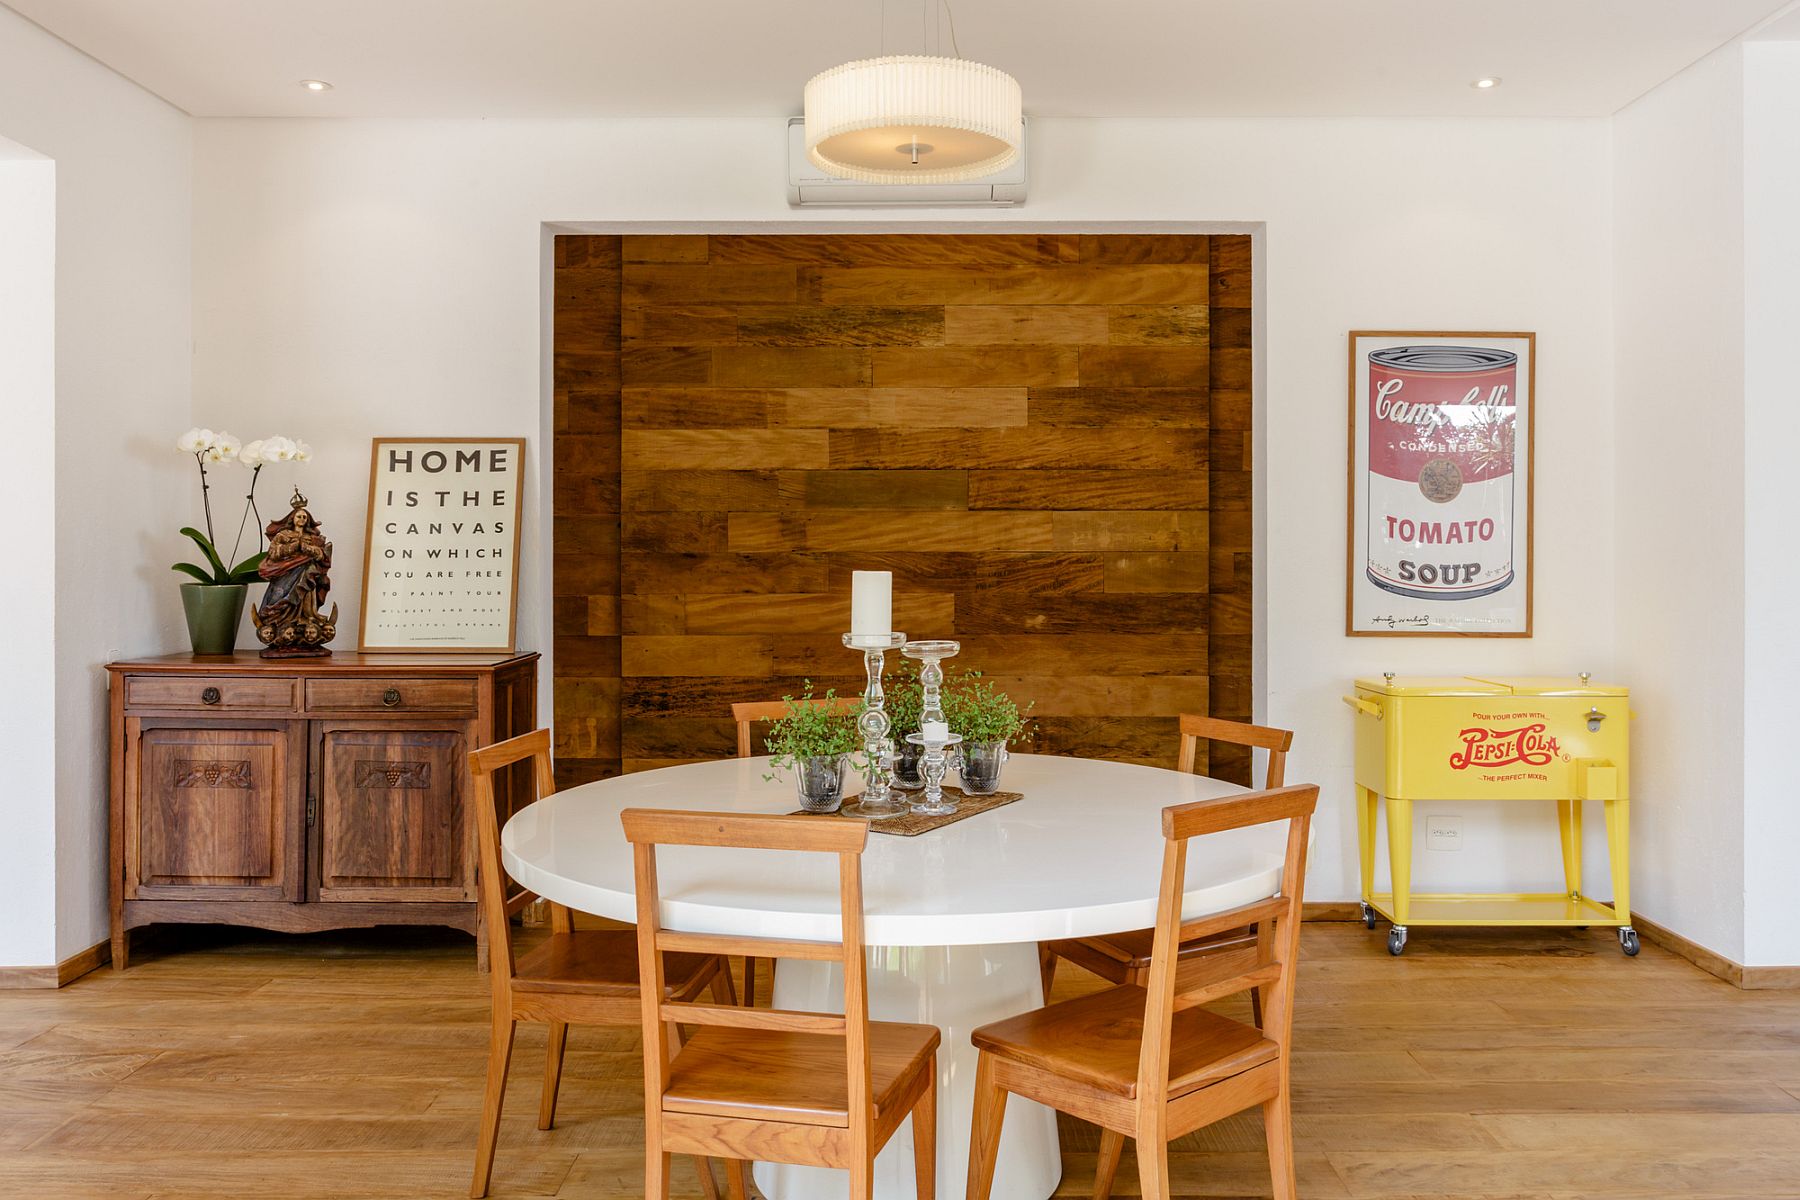 Wooden accent feture in the backdrop brings warmth and contrast to the dining room in white